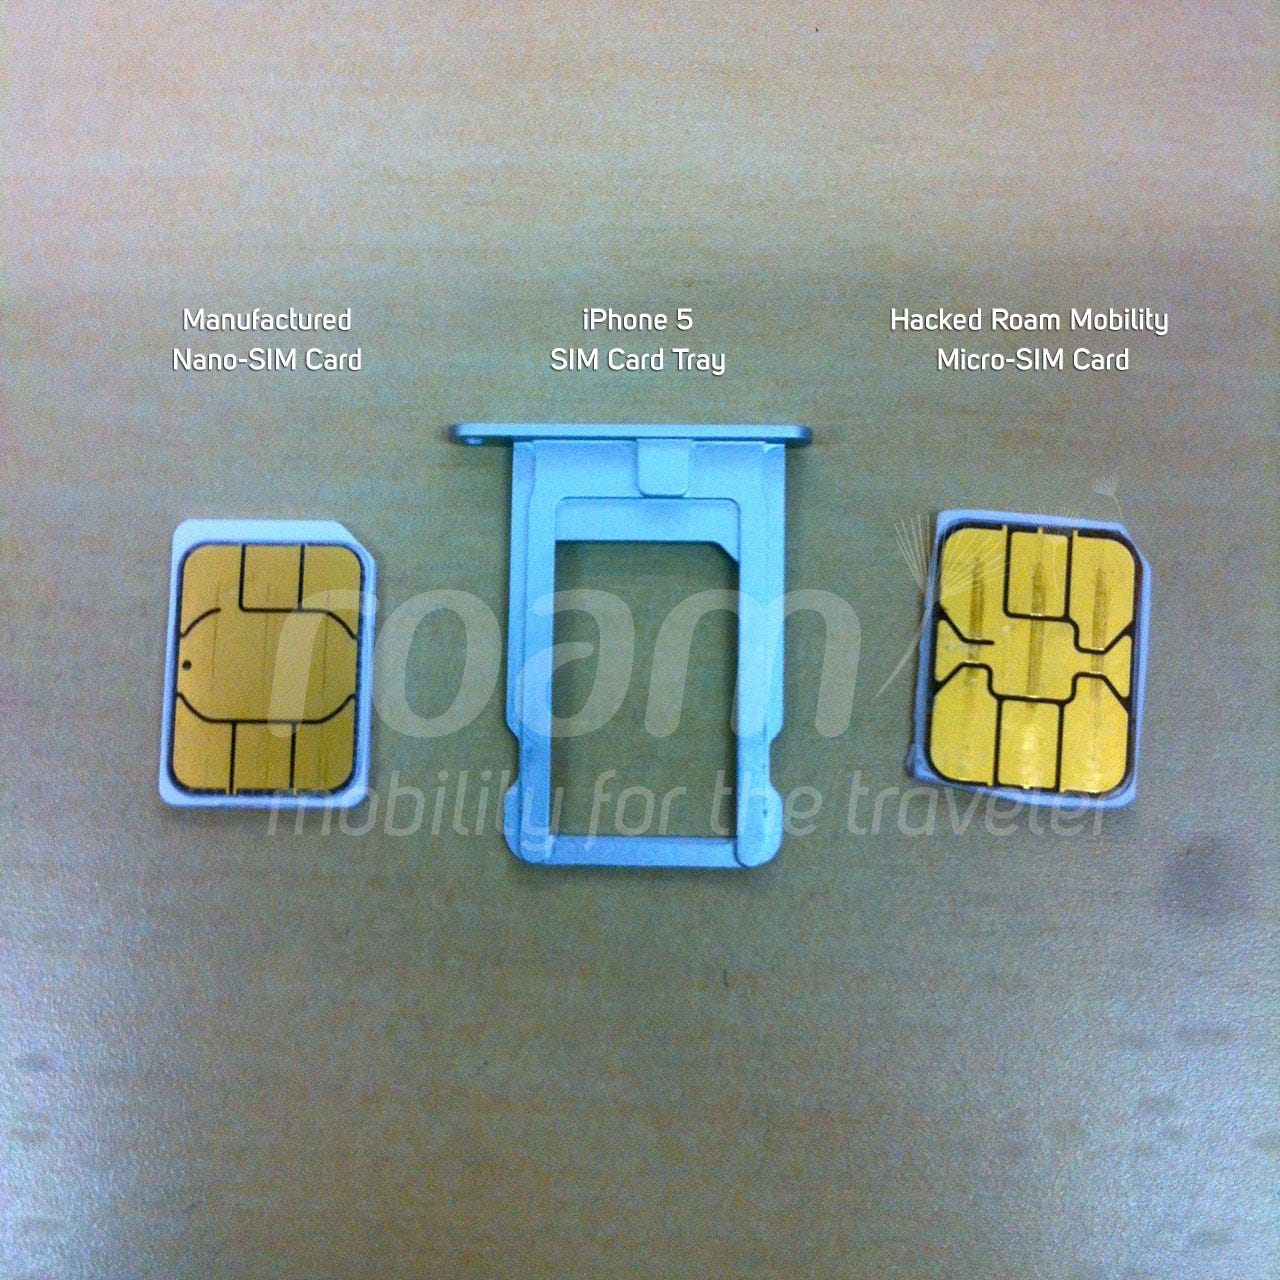 Turn Your Roam Sim Into A Nano Sim For An Unlocked Iphone By